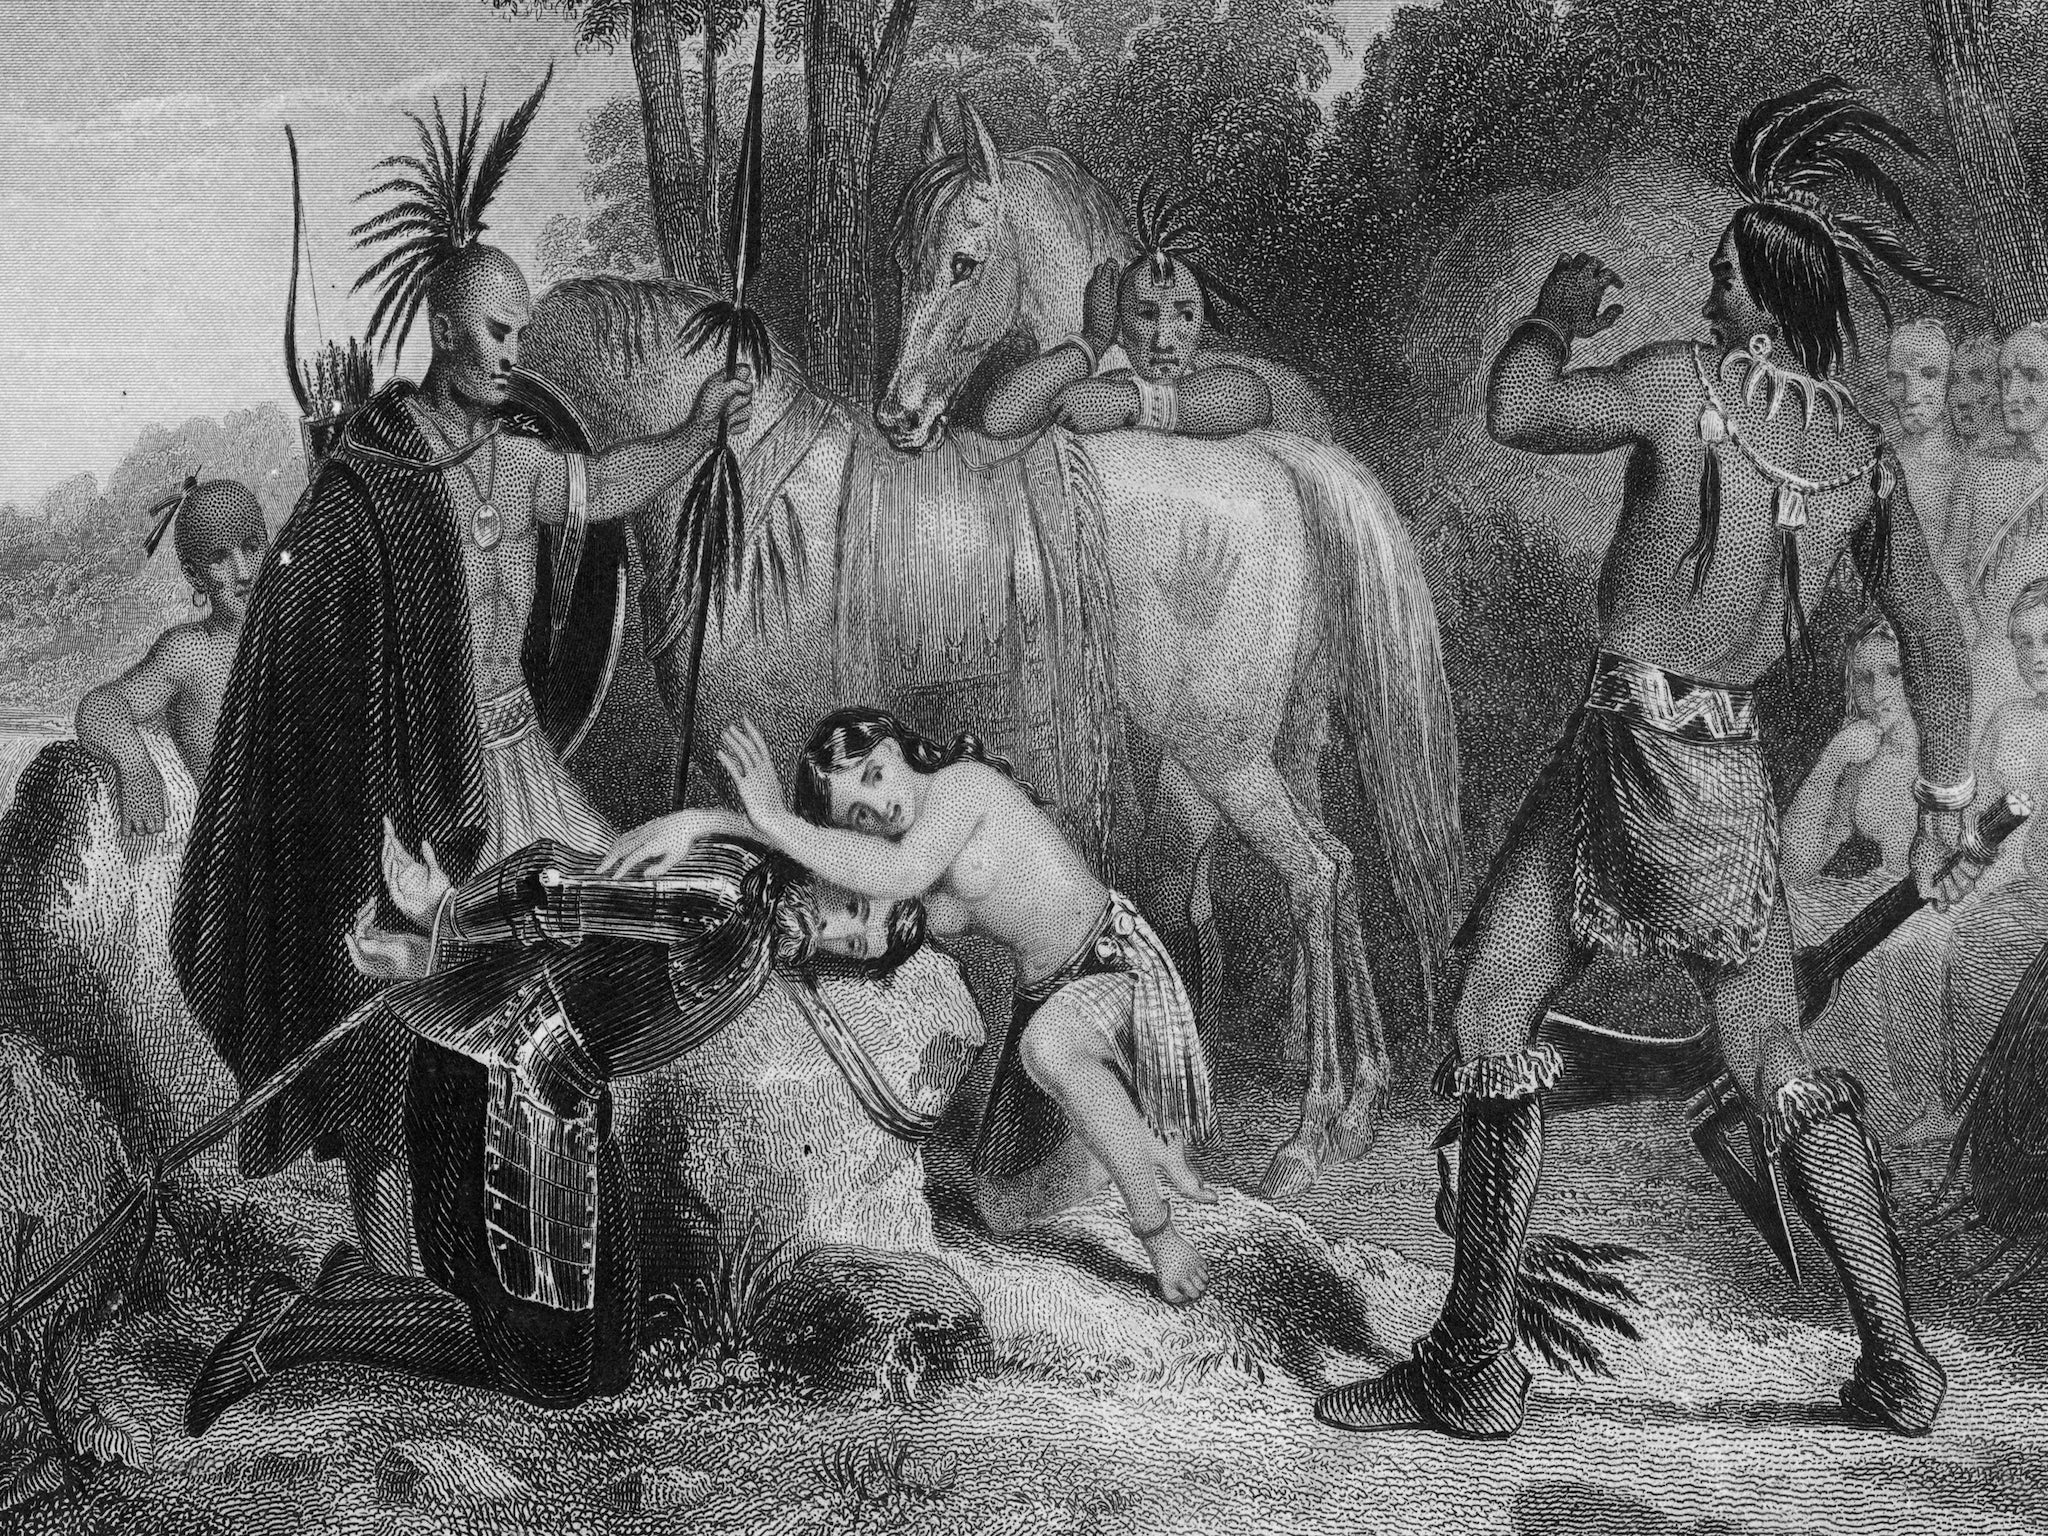 Pocahontas is celebrated for saving the life of John Smith